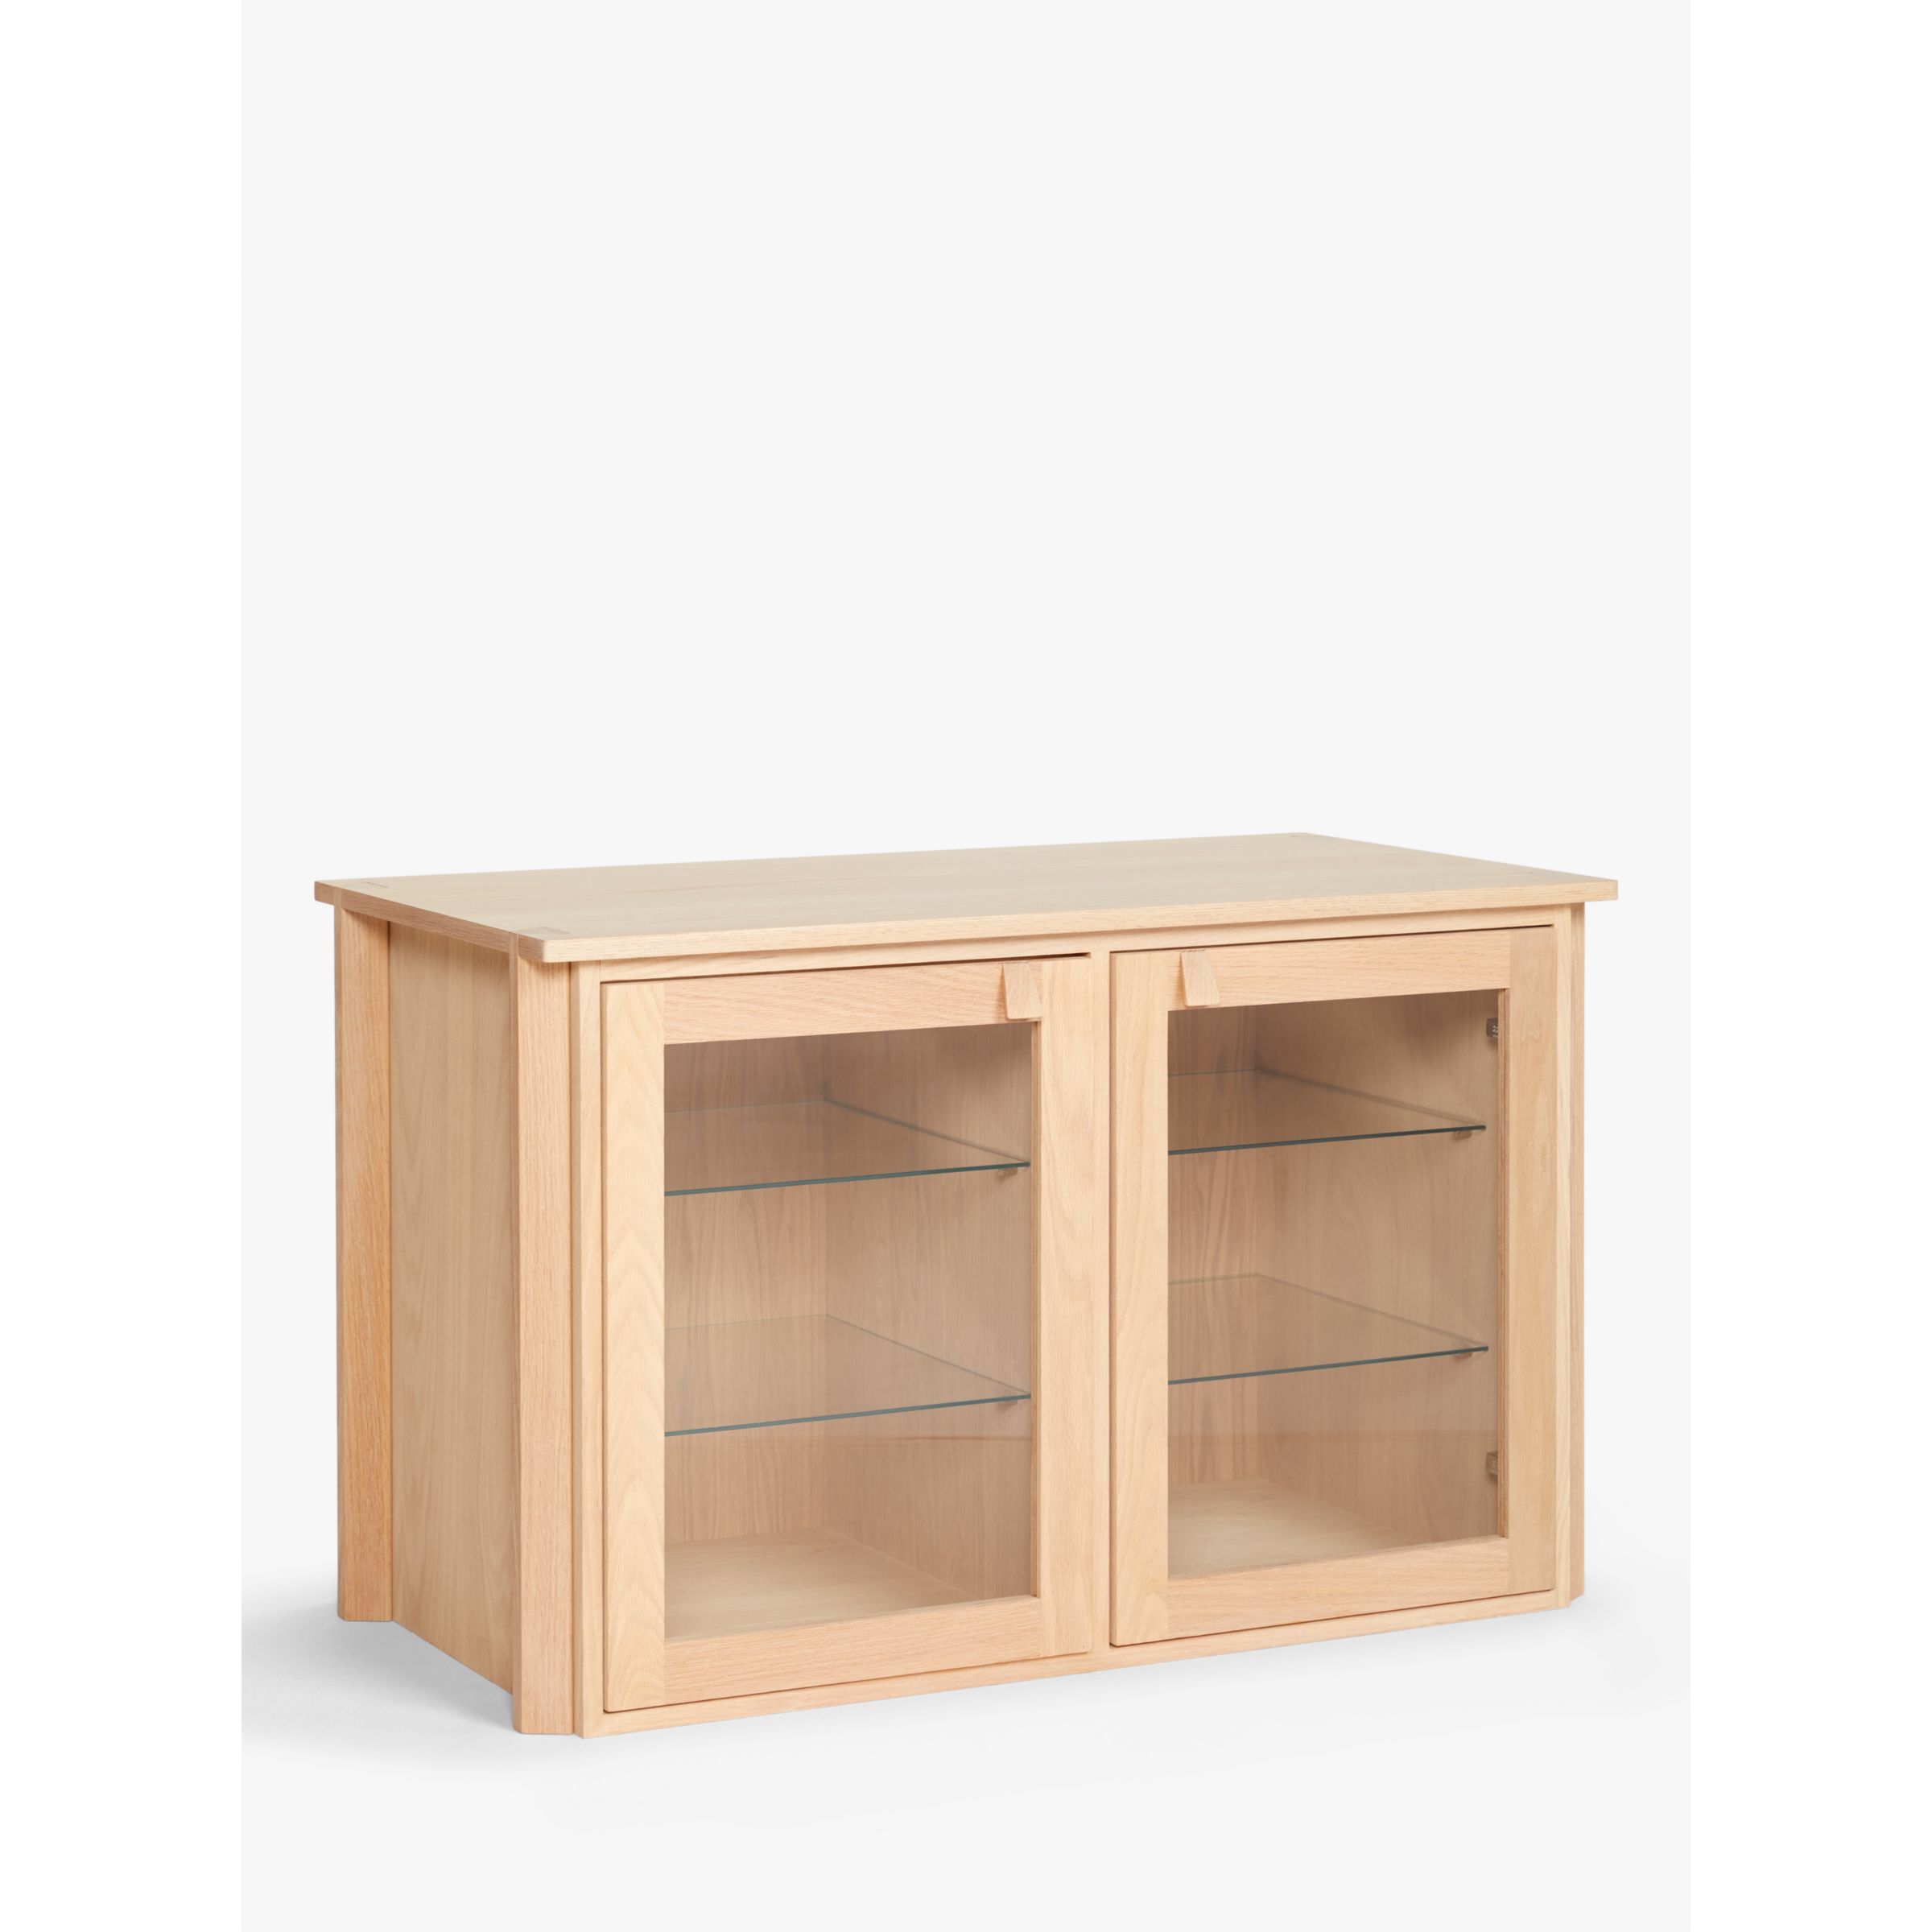 Croft Collection Dovetail Drawer Chest Storage Cabinet Oak At John Lewis Partners